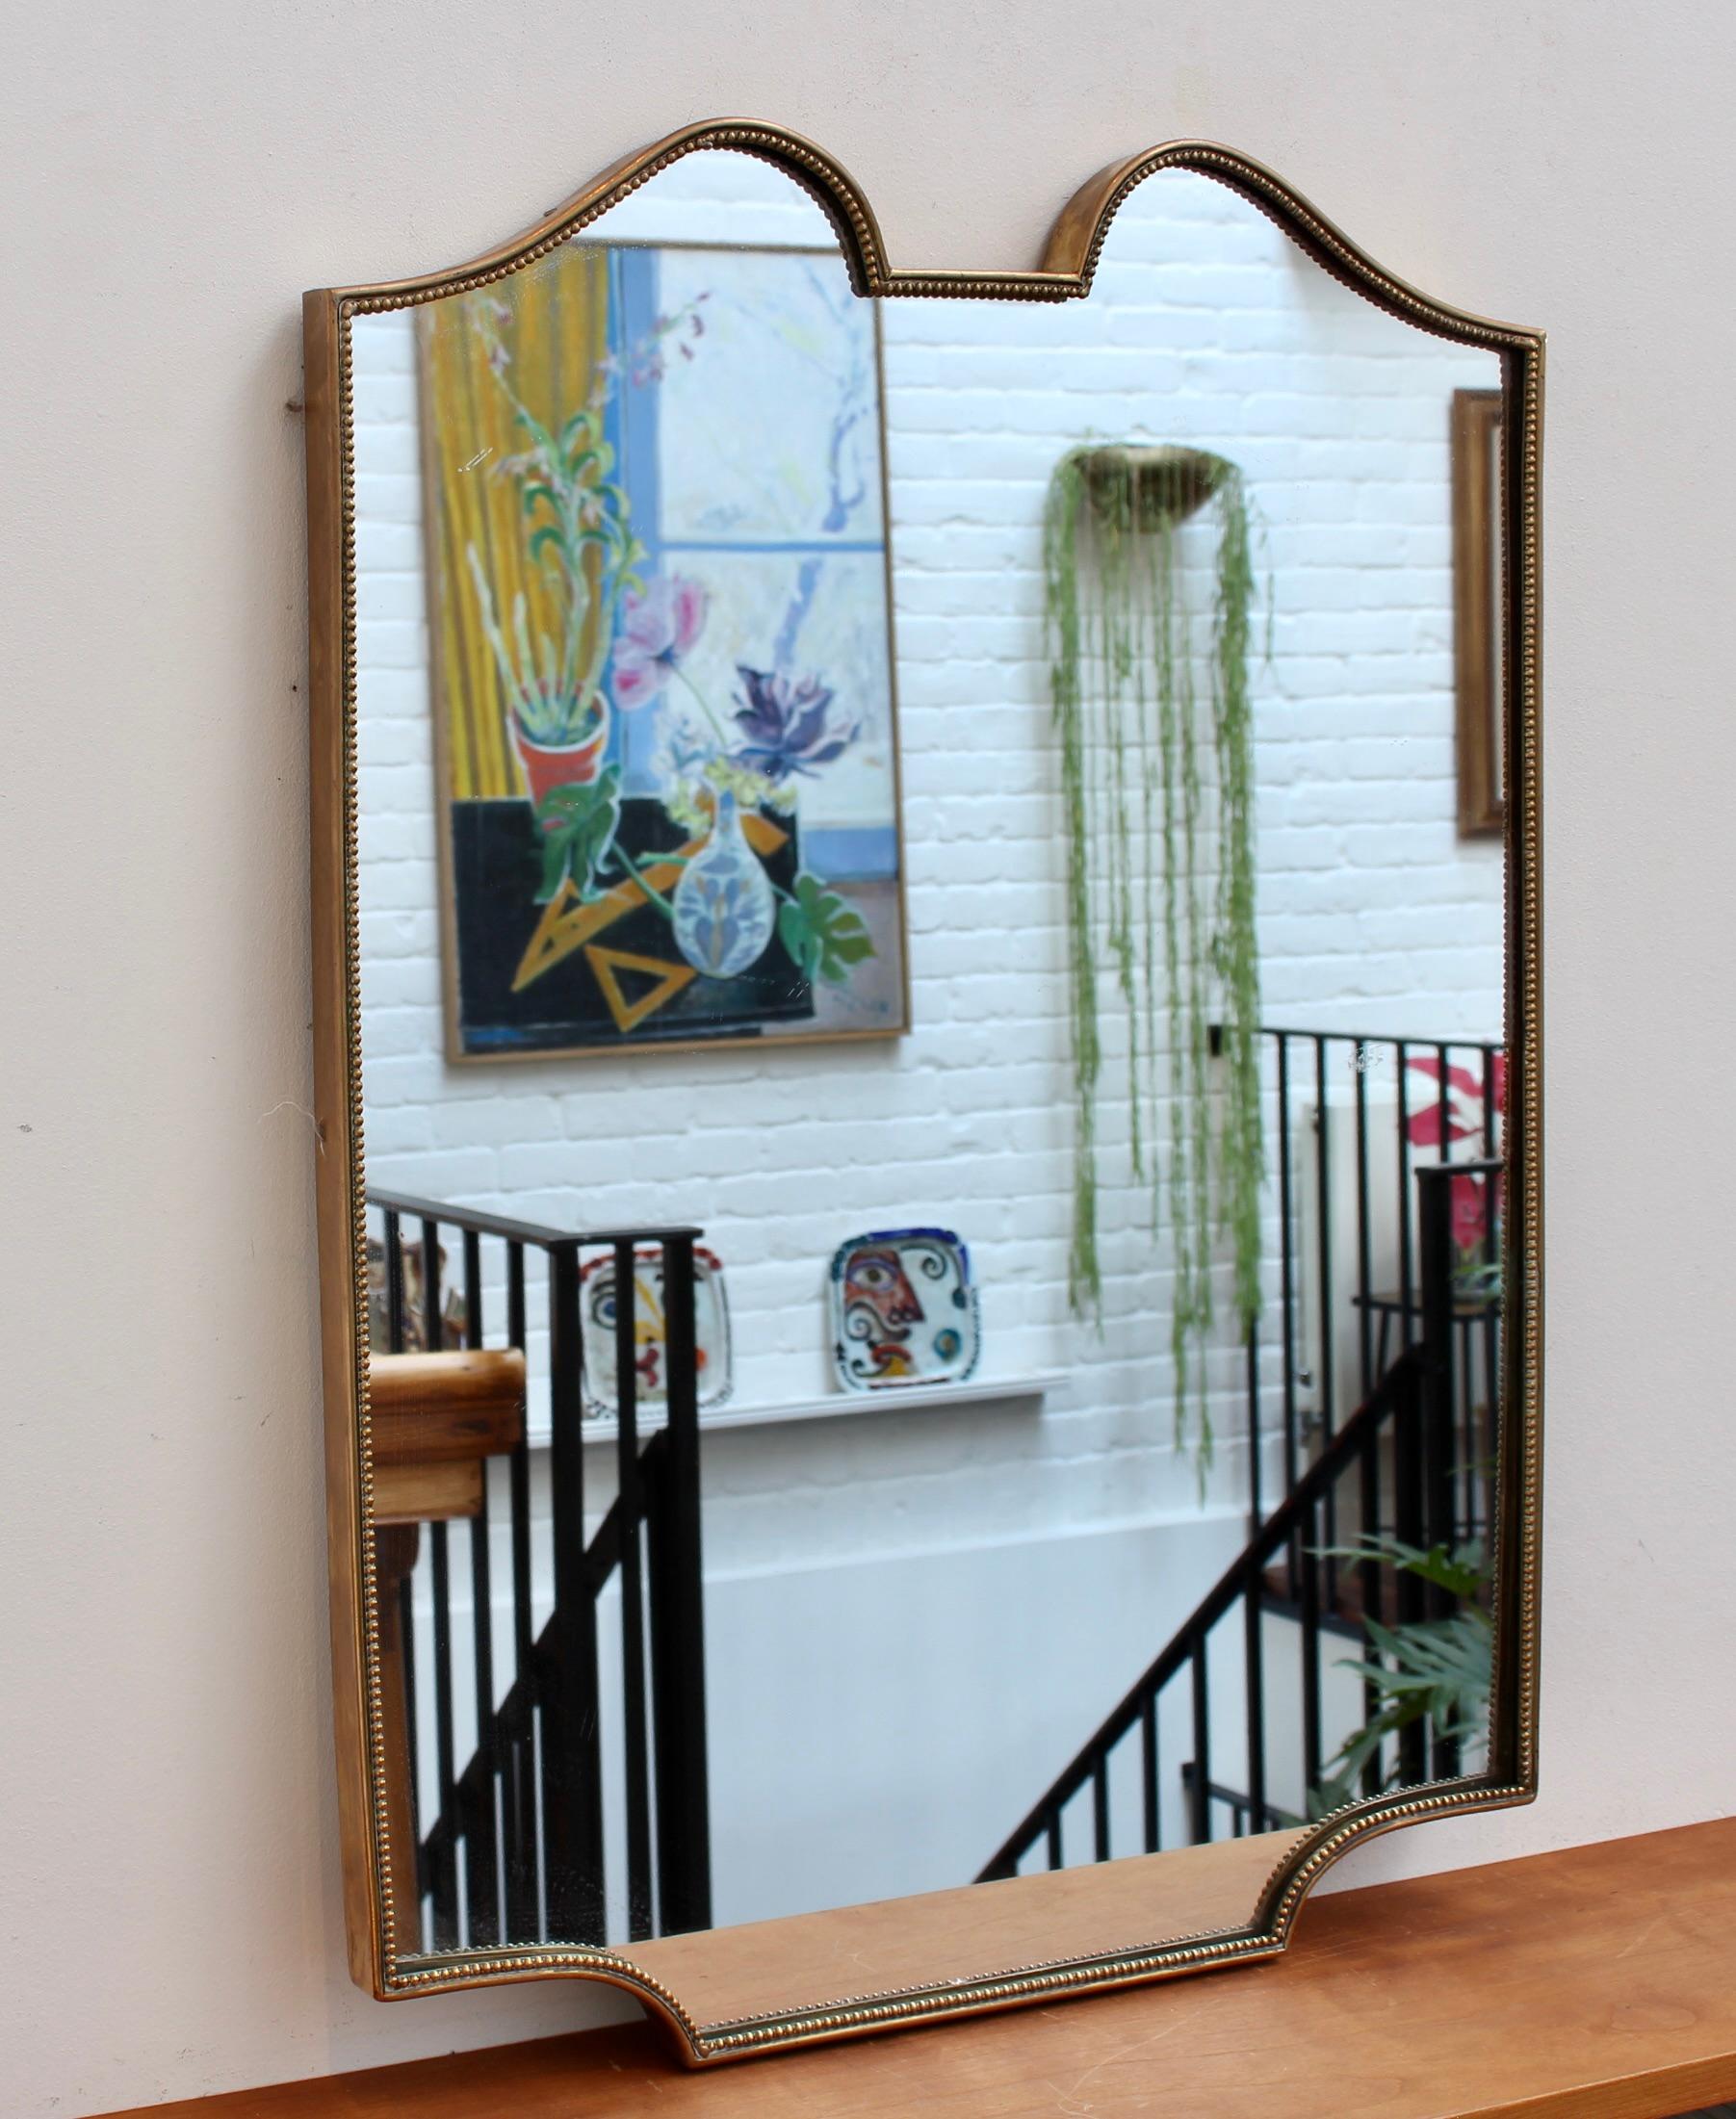 Mid-century Italian wall mirror in a brass frame with beading (circa 1950s). The smart, sturdy mirror sports a very original and delightful shape. Like other mirrors in this style, they are always classically elegant and distinctive. In good overall